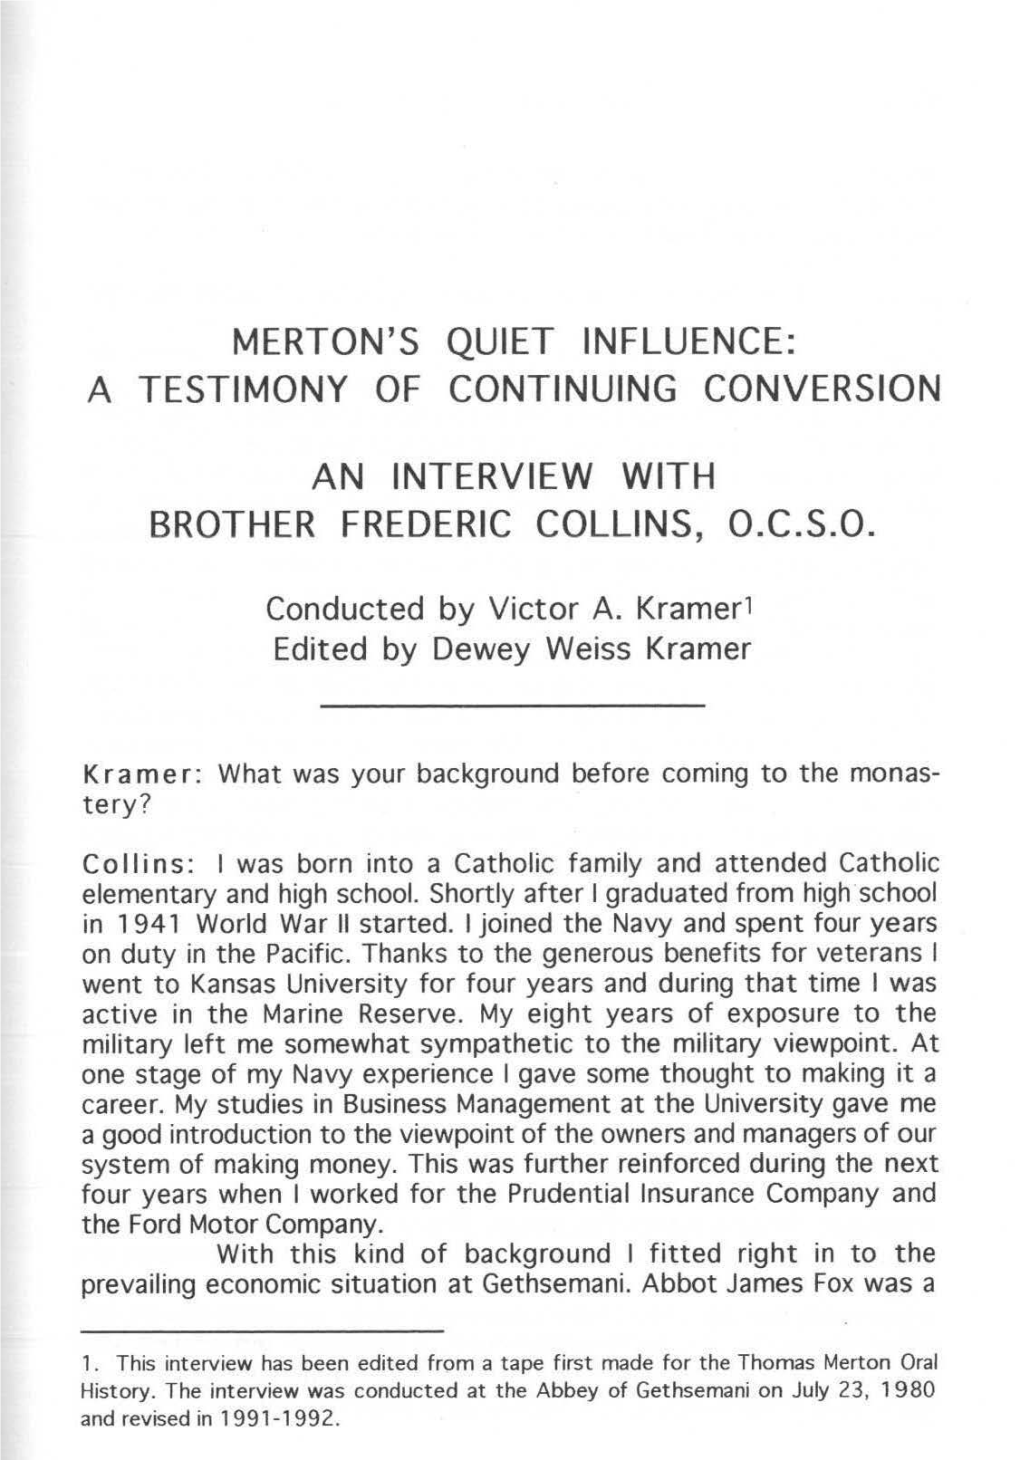 Merton's Quiet Influence: a Testimony of Continuing Conversion